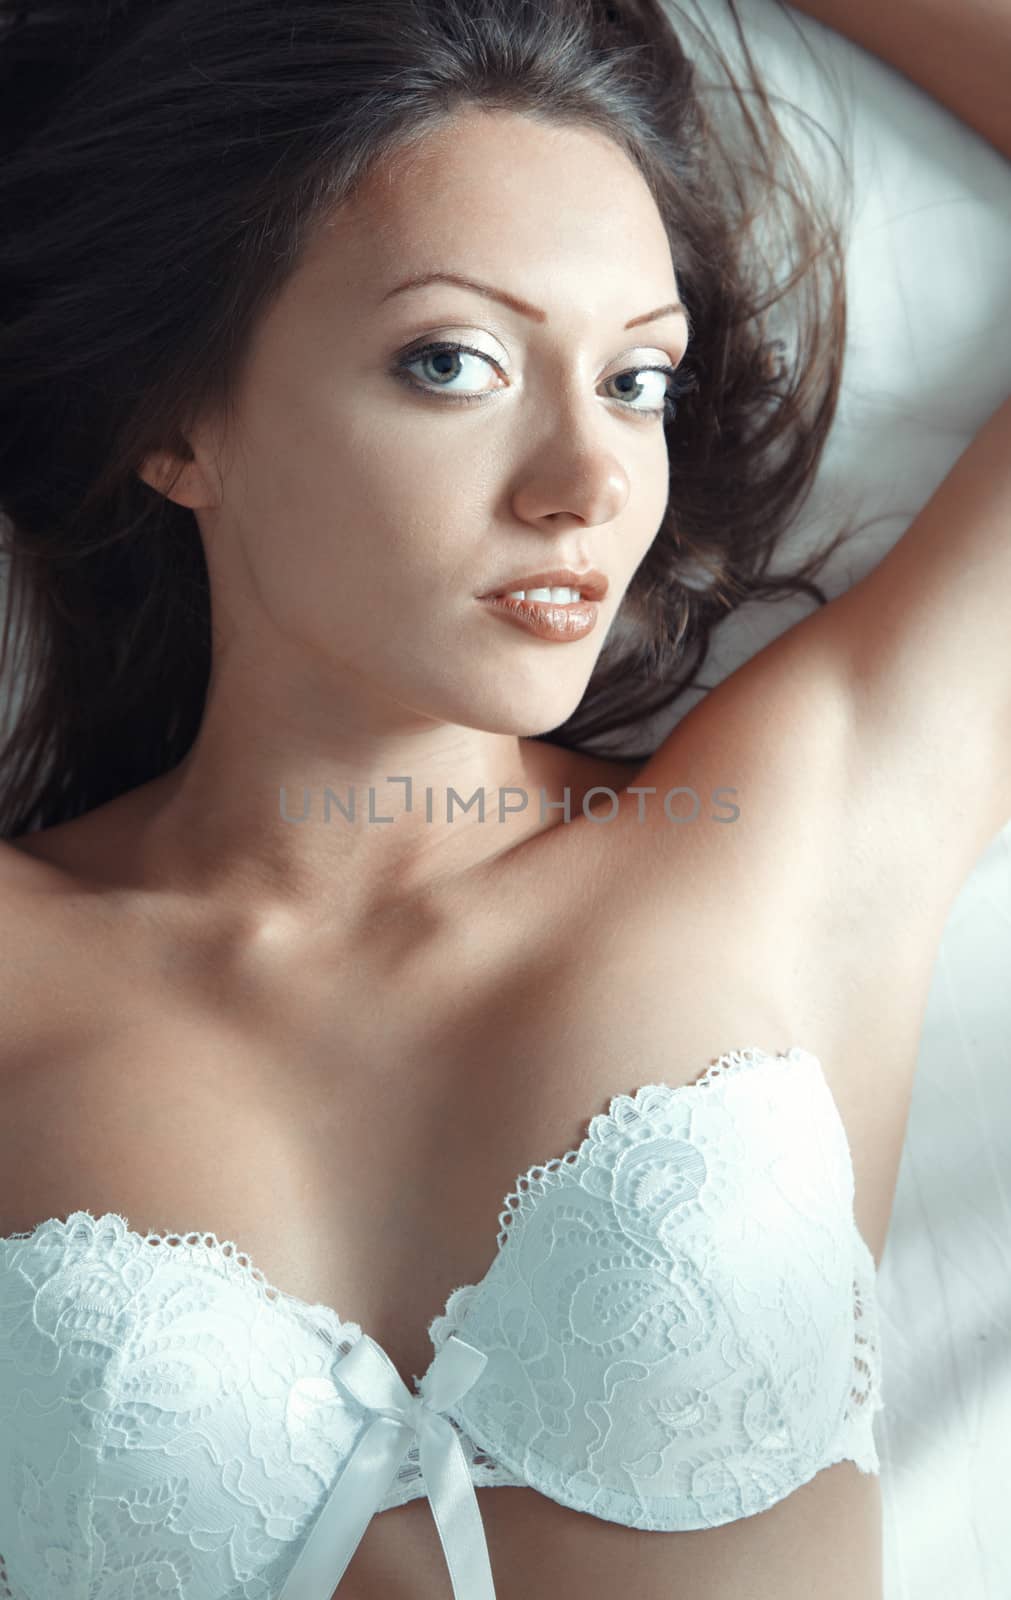 Sexy lady with white camisole laying and pampering on the bed. Natural light and colors